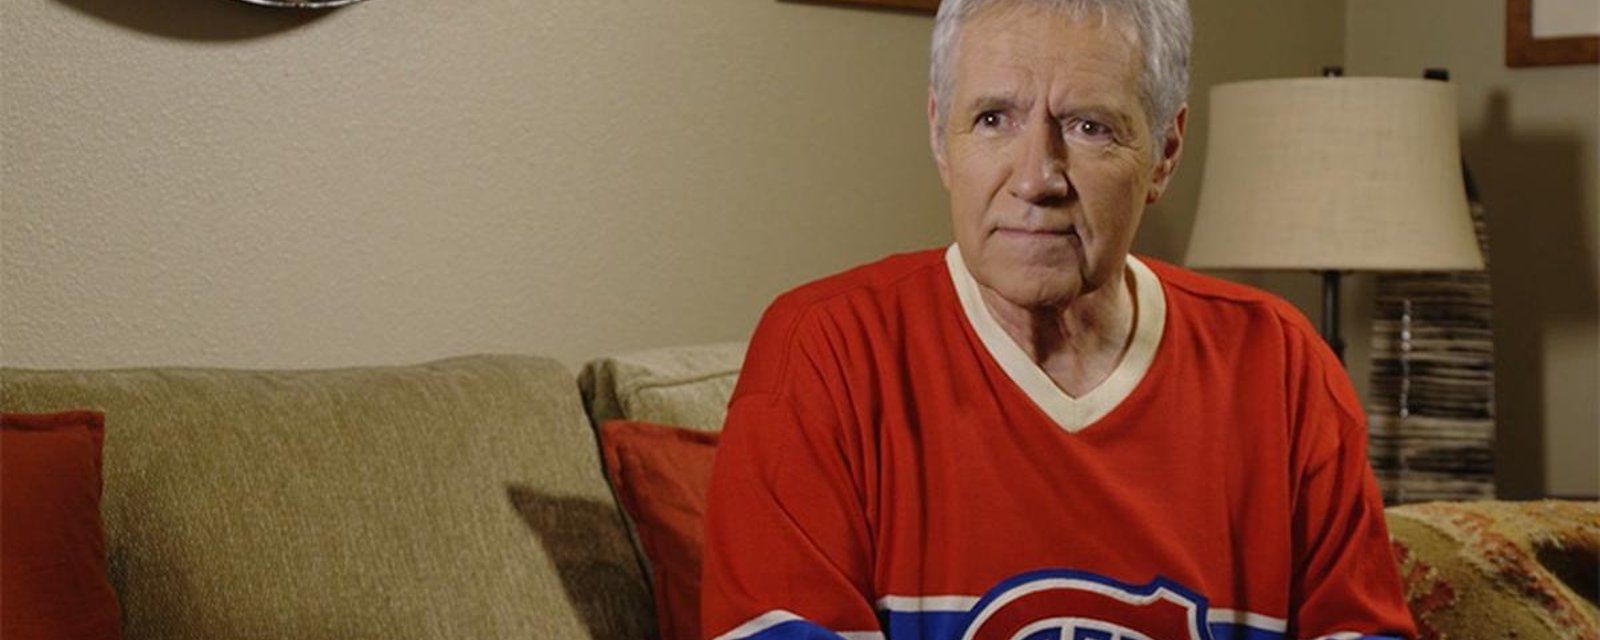 The hockey community reacts to the passing of Alex Trebek.